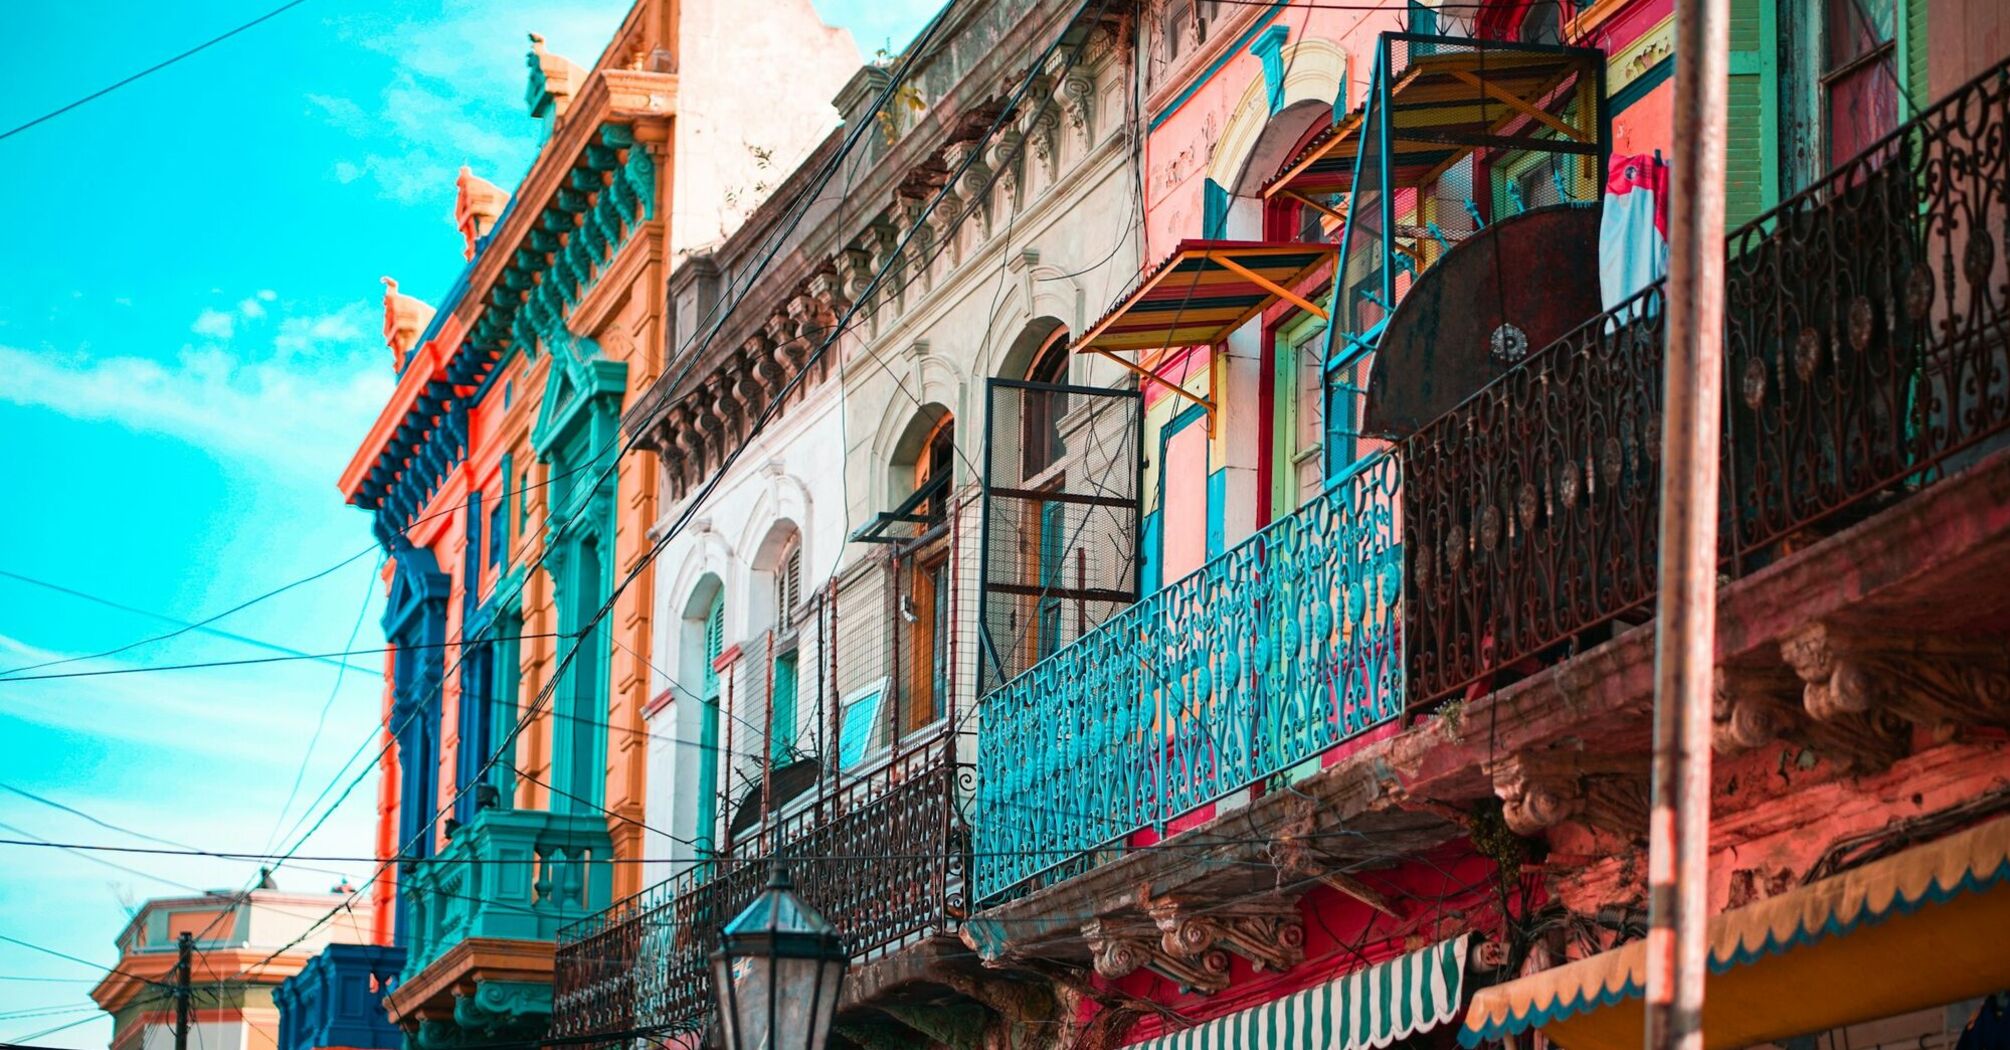 Colorful facades of buildings with balconies in Buenos Aires, Argentina